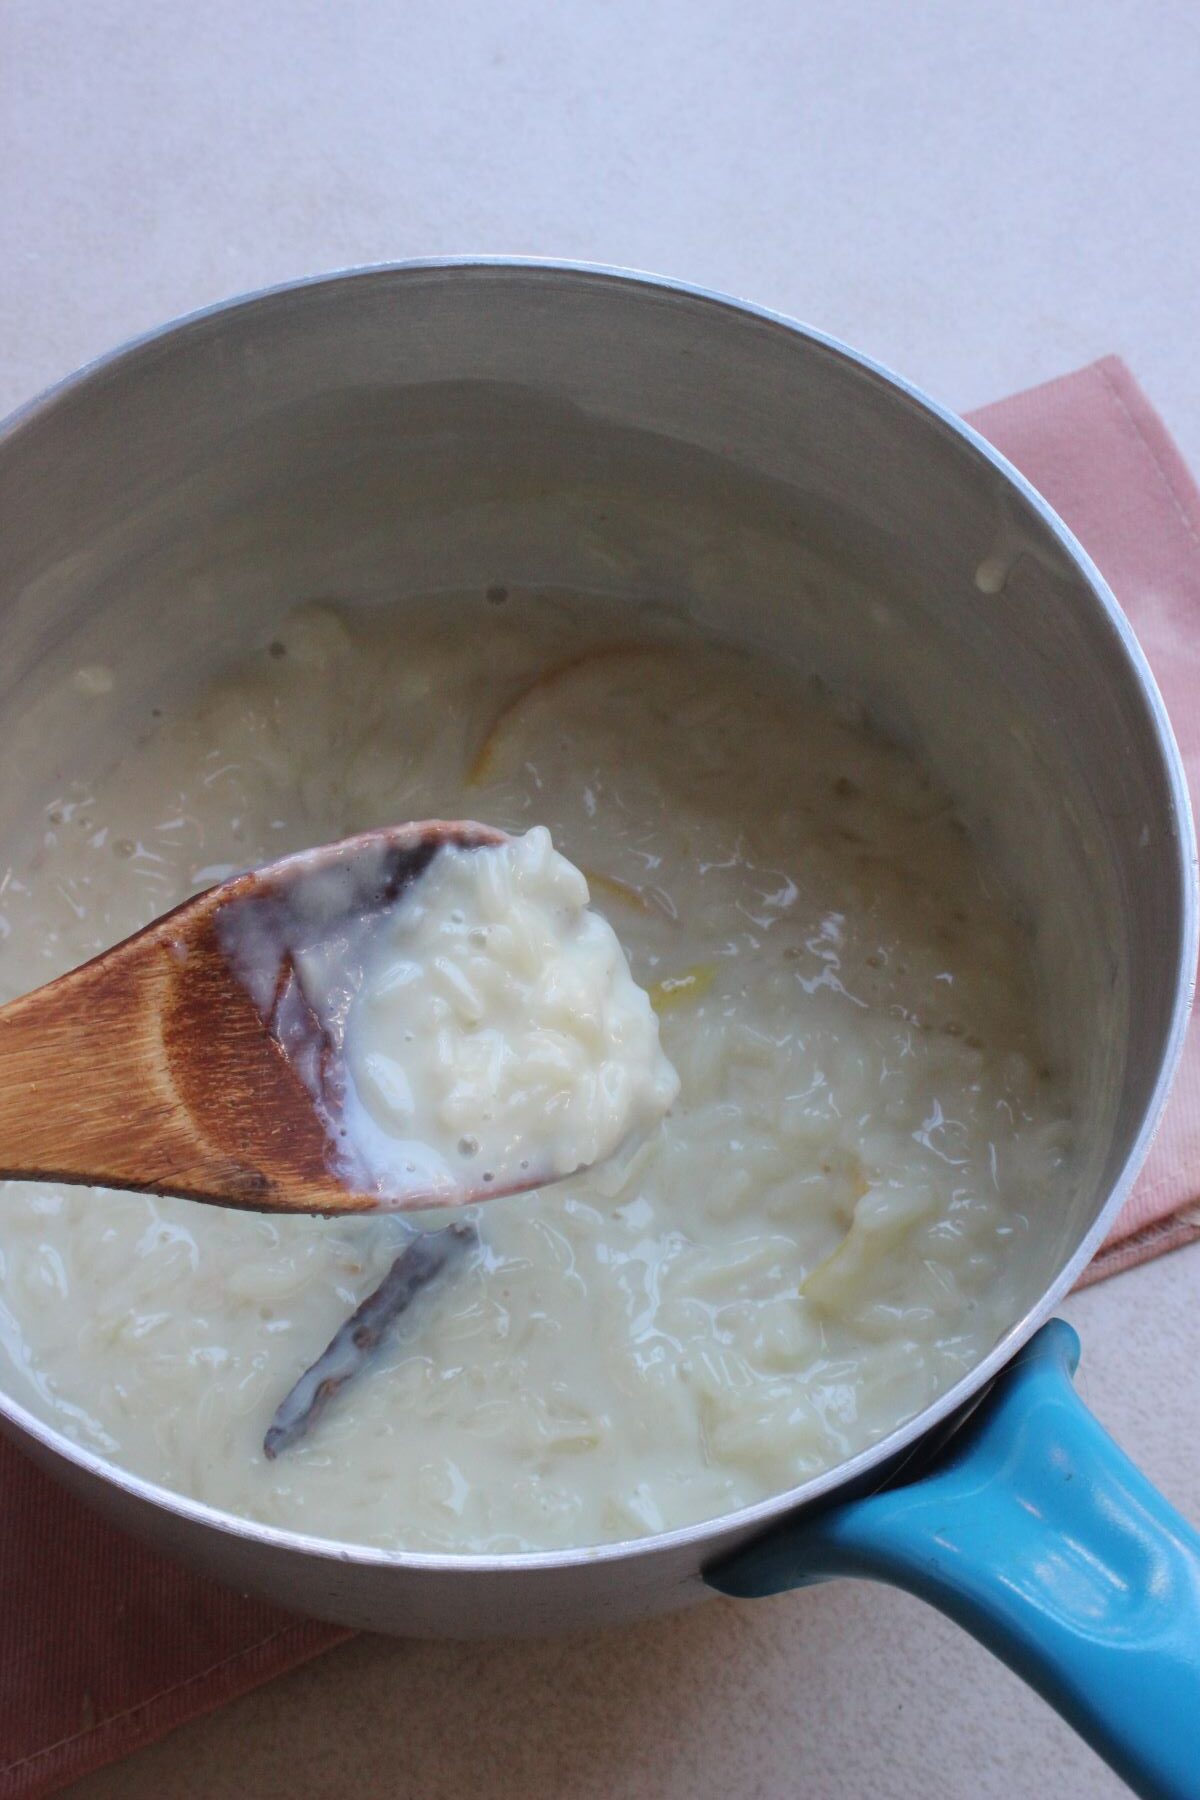 A deep saucepan with rice pudding, and a wooden spoon with rice pudding.